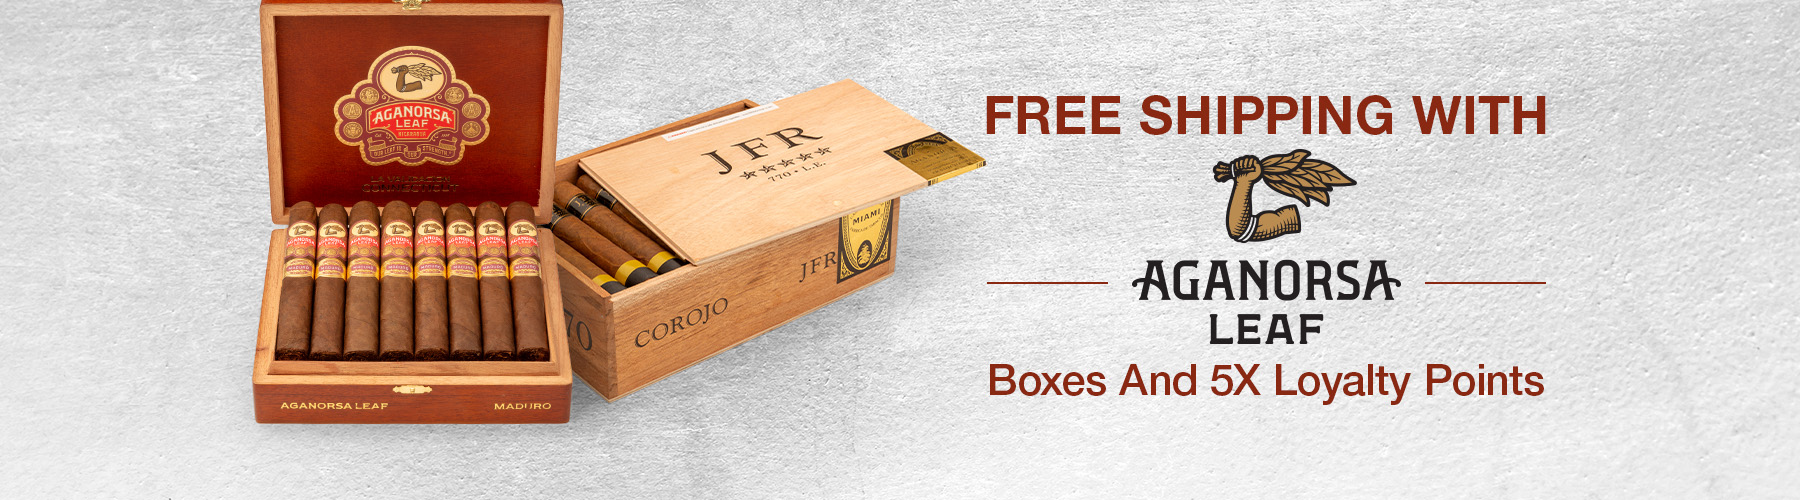 Free Shipping with Agornsa Leaf boxes or 5-packs
& 5X Loyalty Points